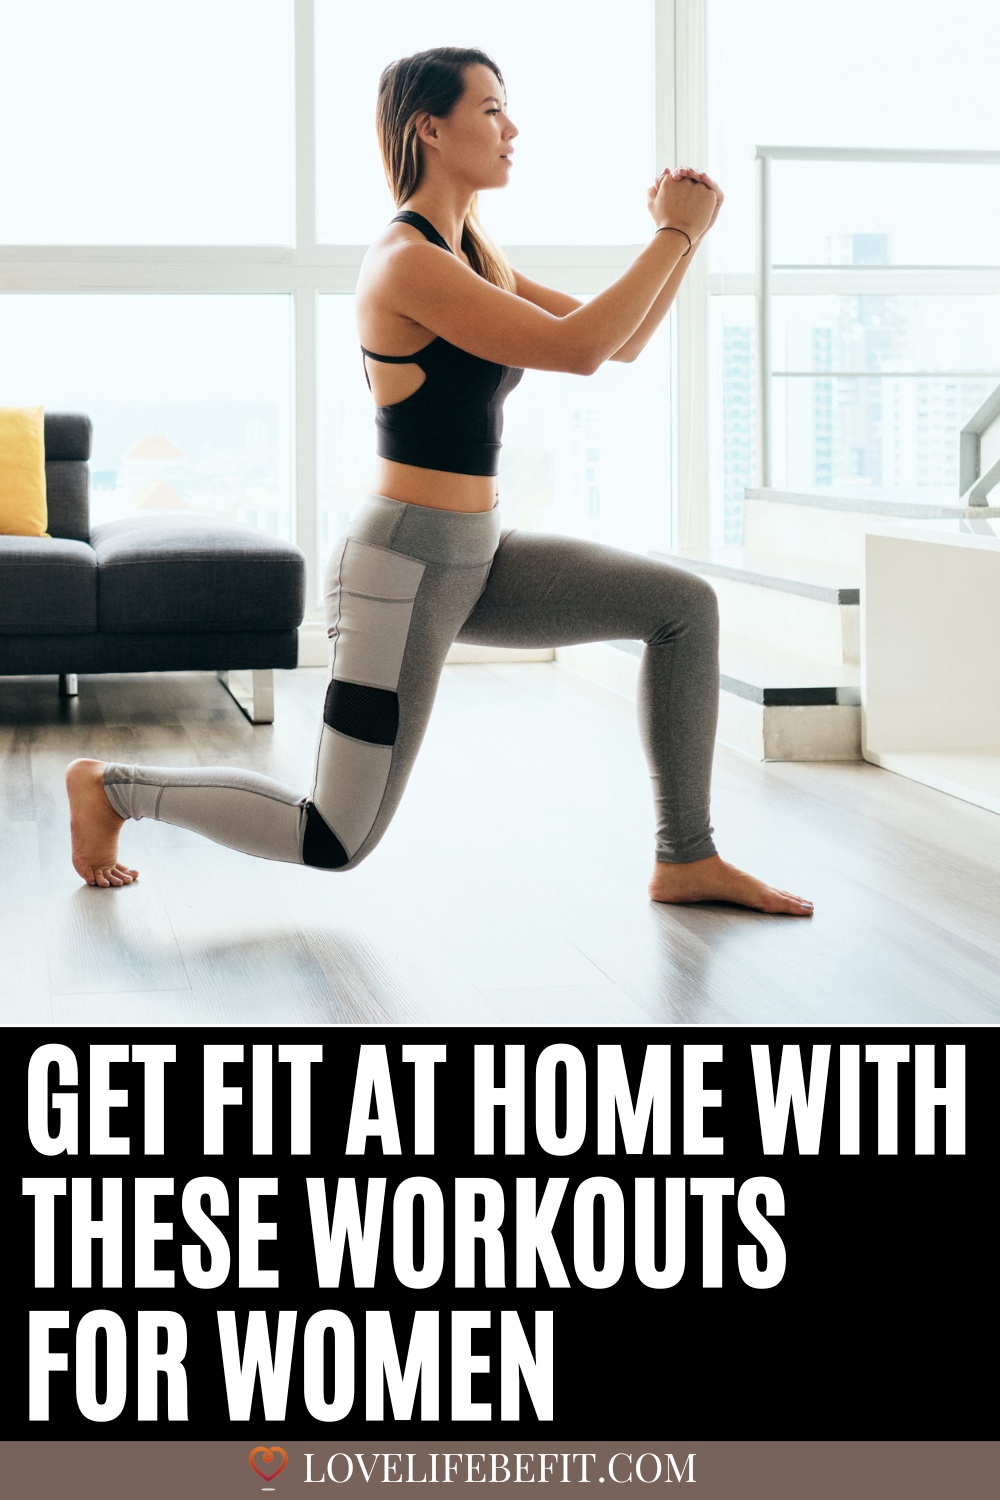 Get fit at home with these workouts for women